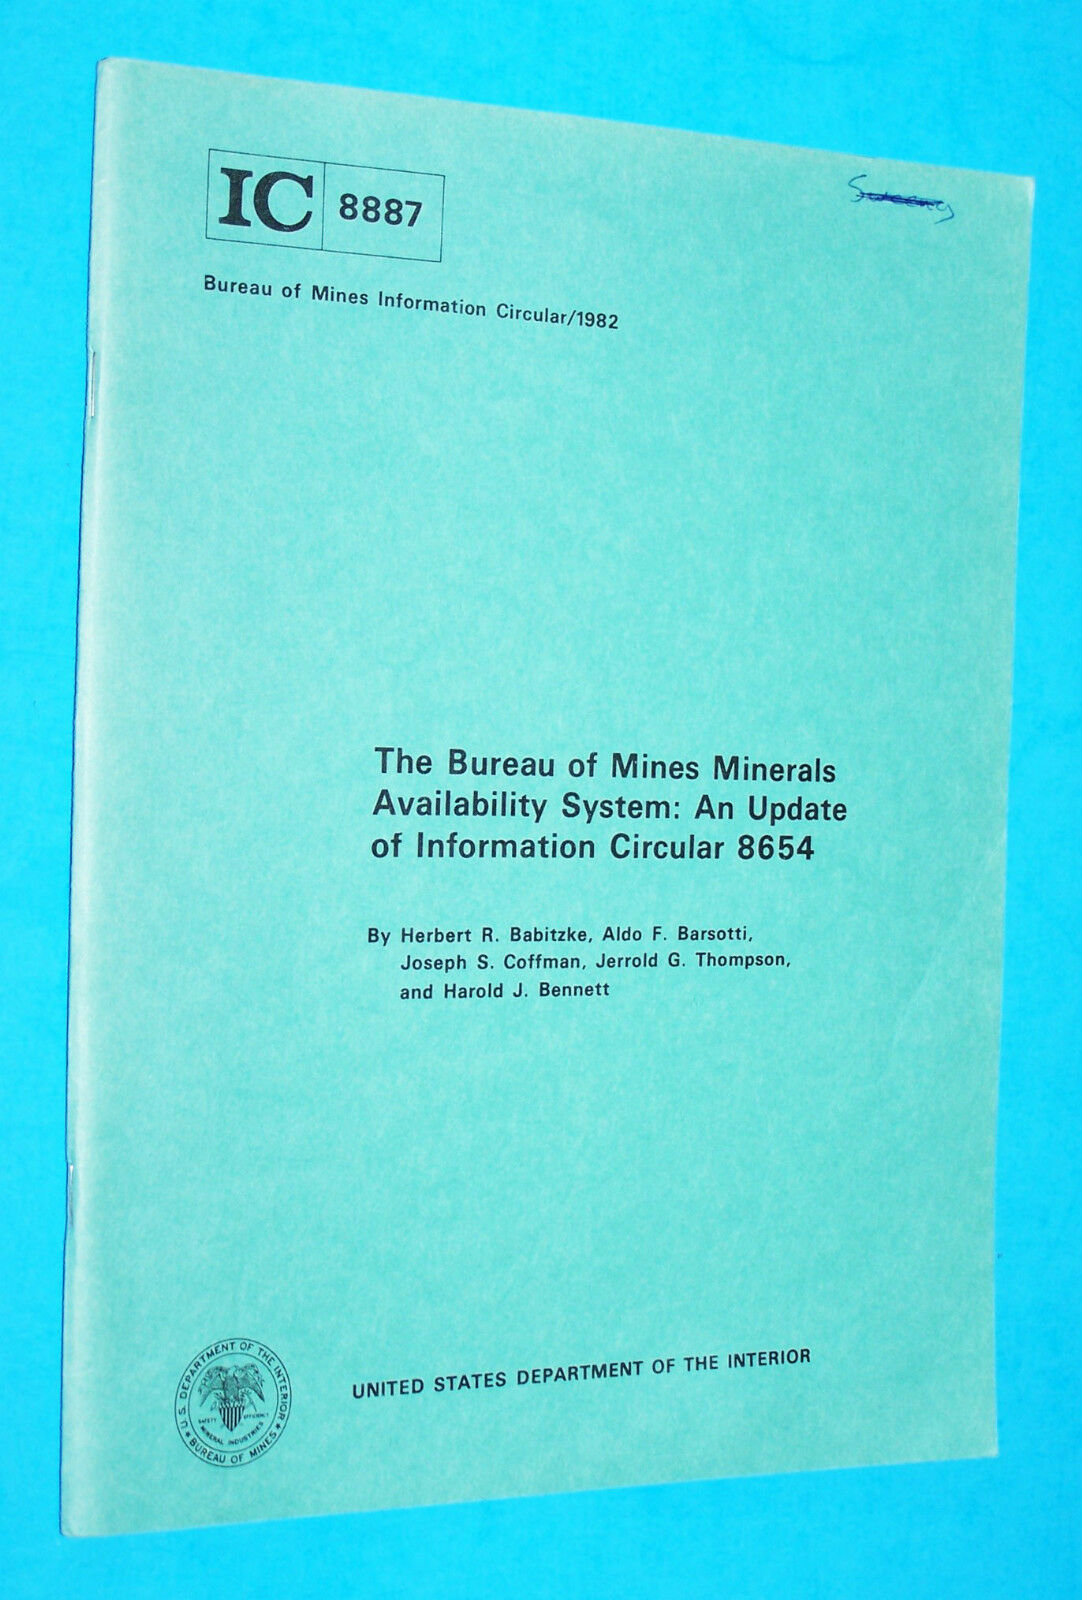 1982 Update Circular Ic 8887/8654 "bureau Of Mines Minerals Availability System"